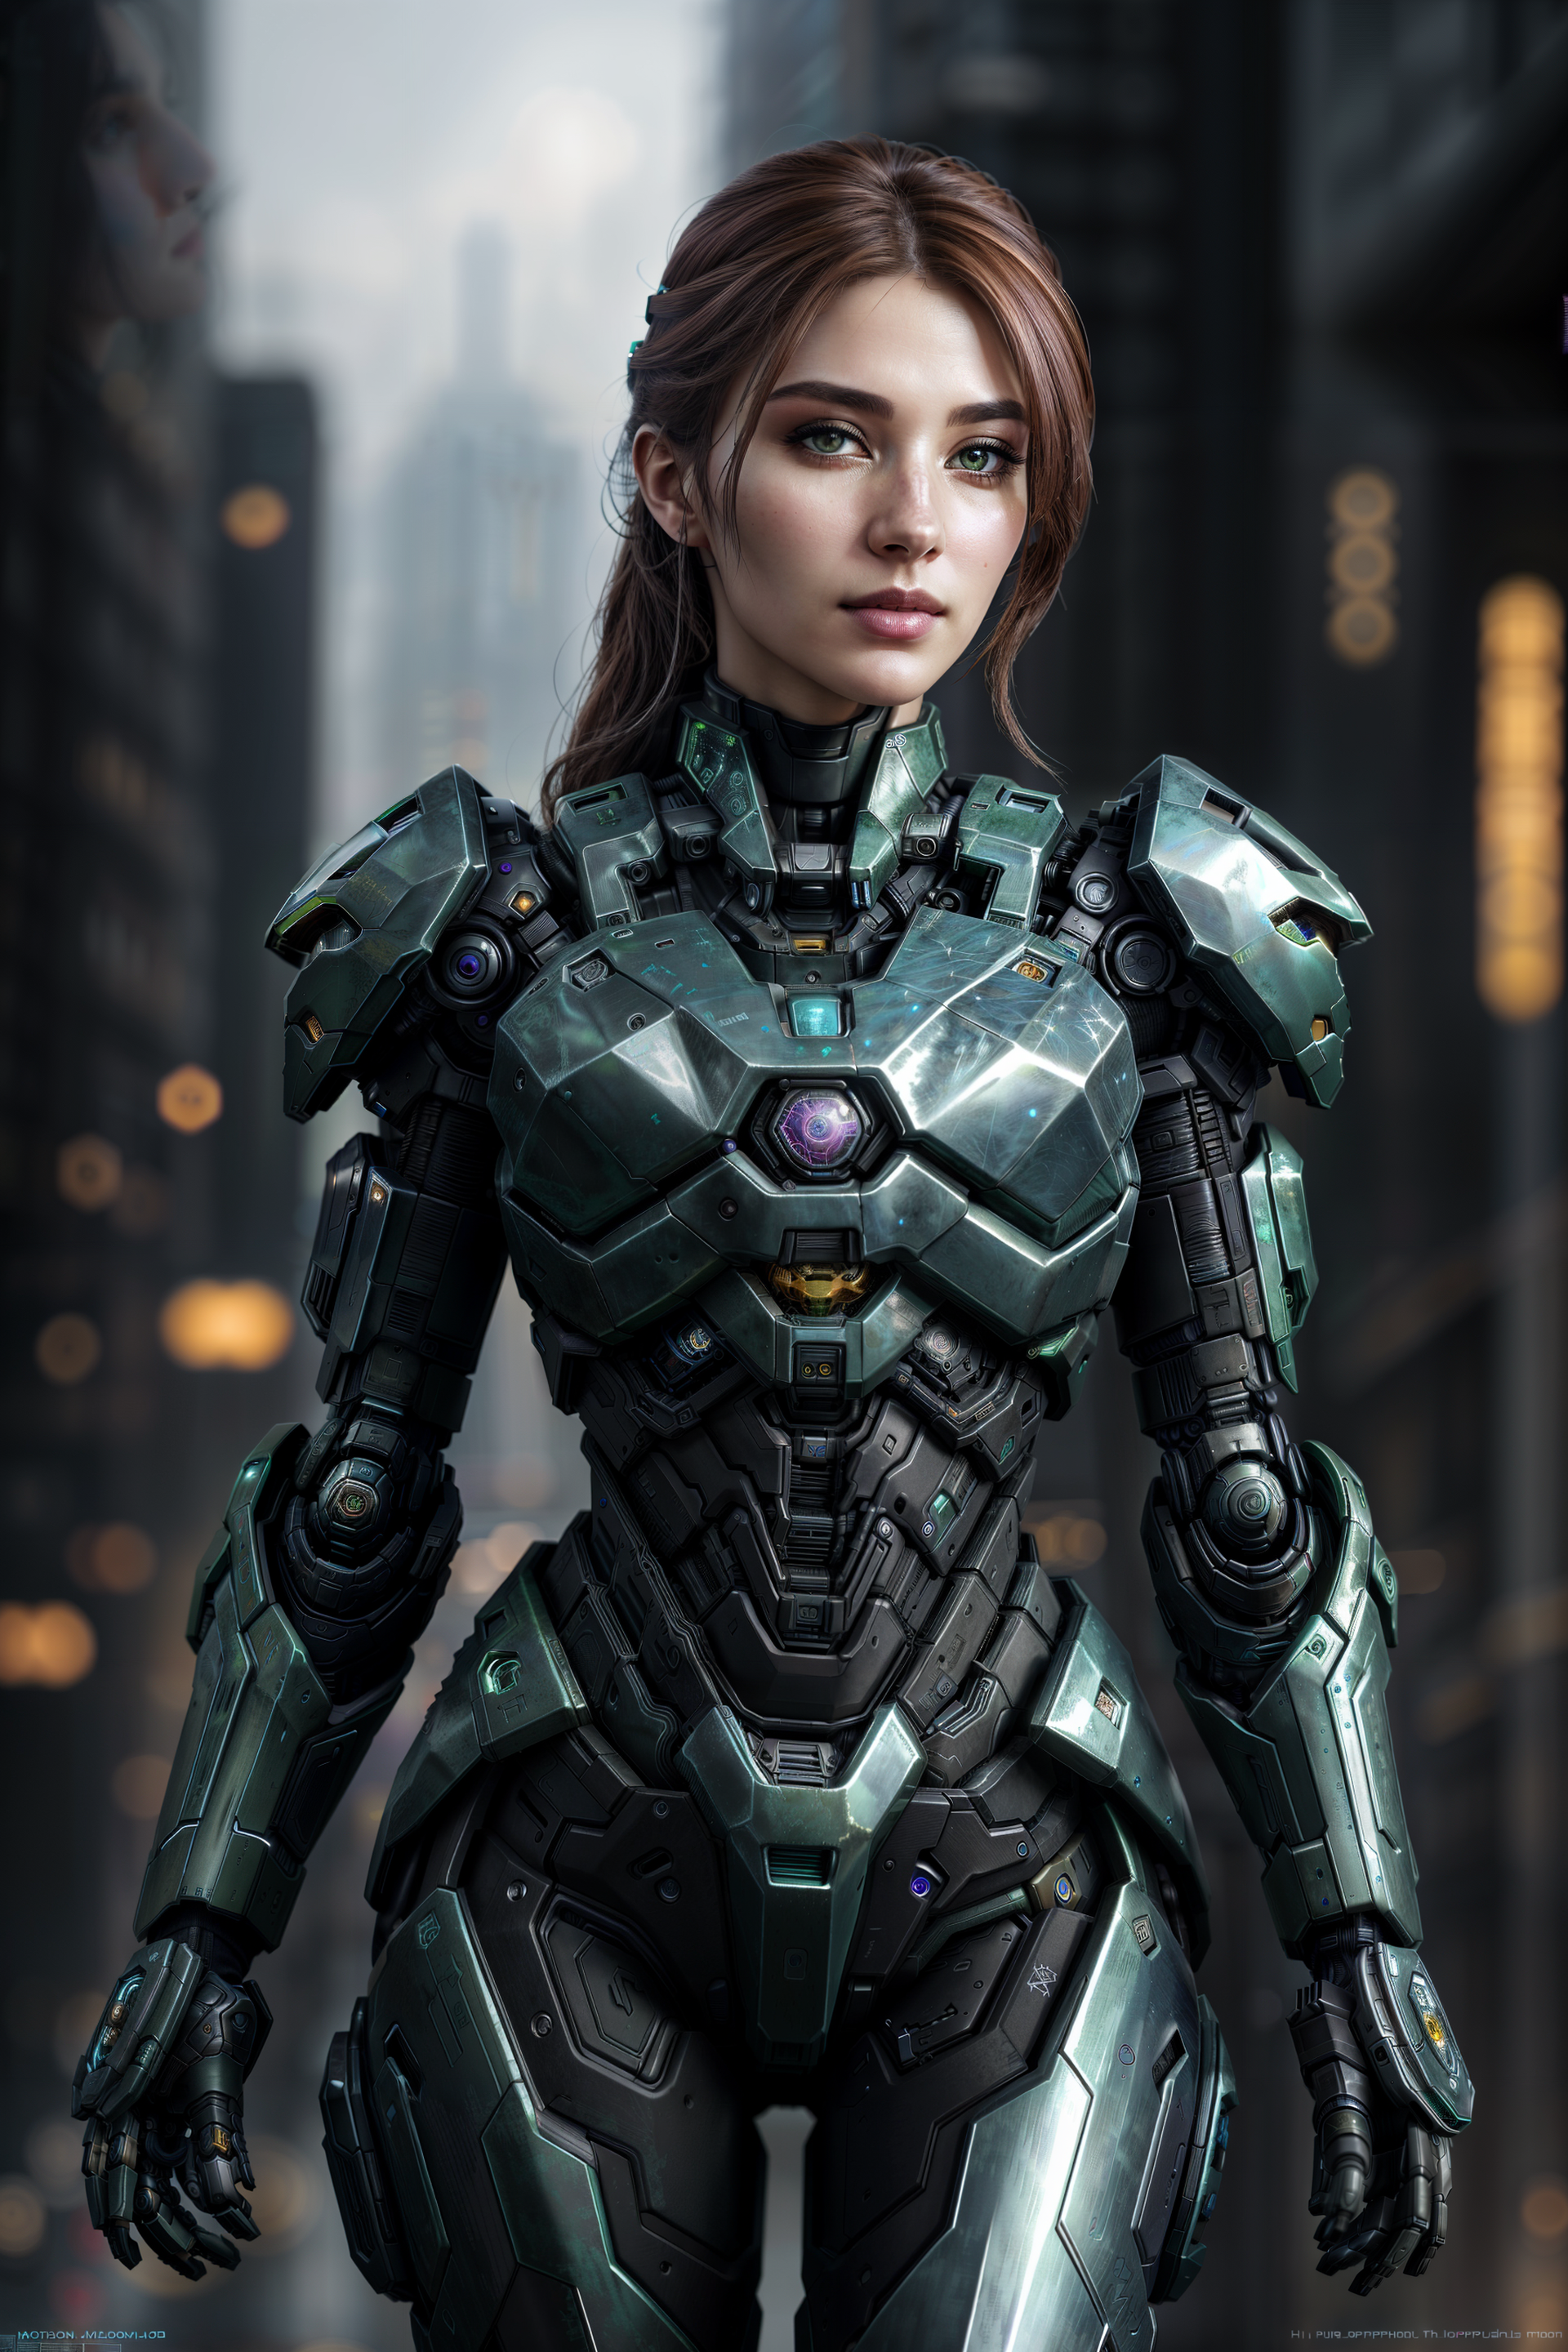 a HDR photograph of a beautiful woman, halo, intricate cyberpunk robot, highly detailed, soft bokeh, art by mooncryptowow ...